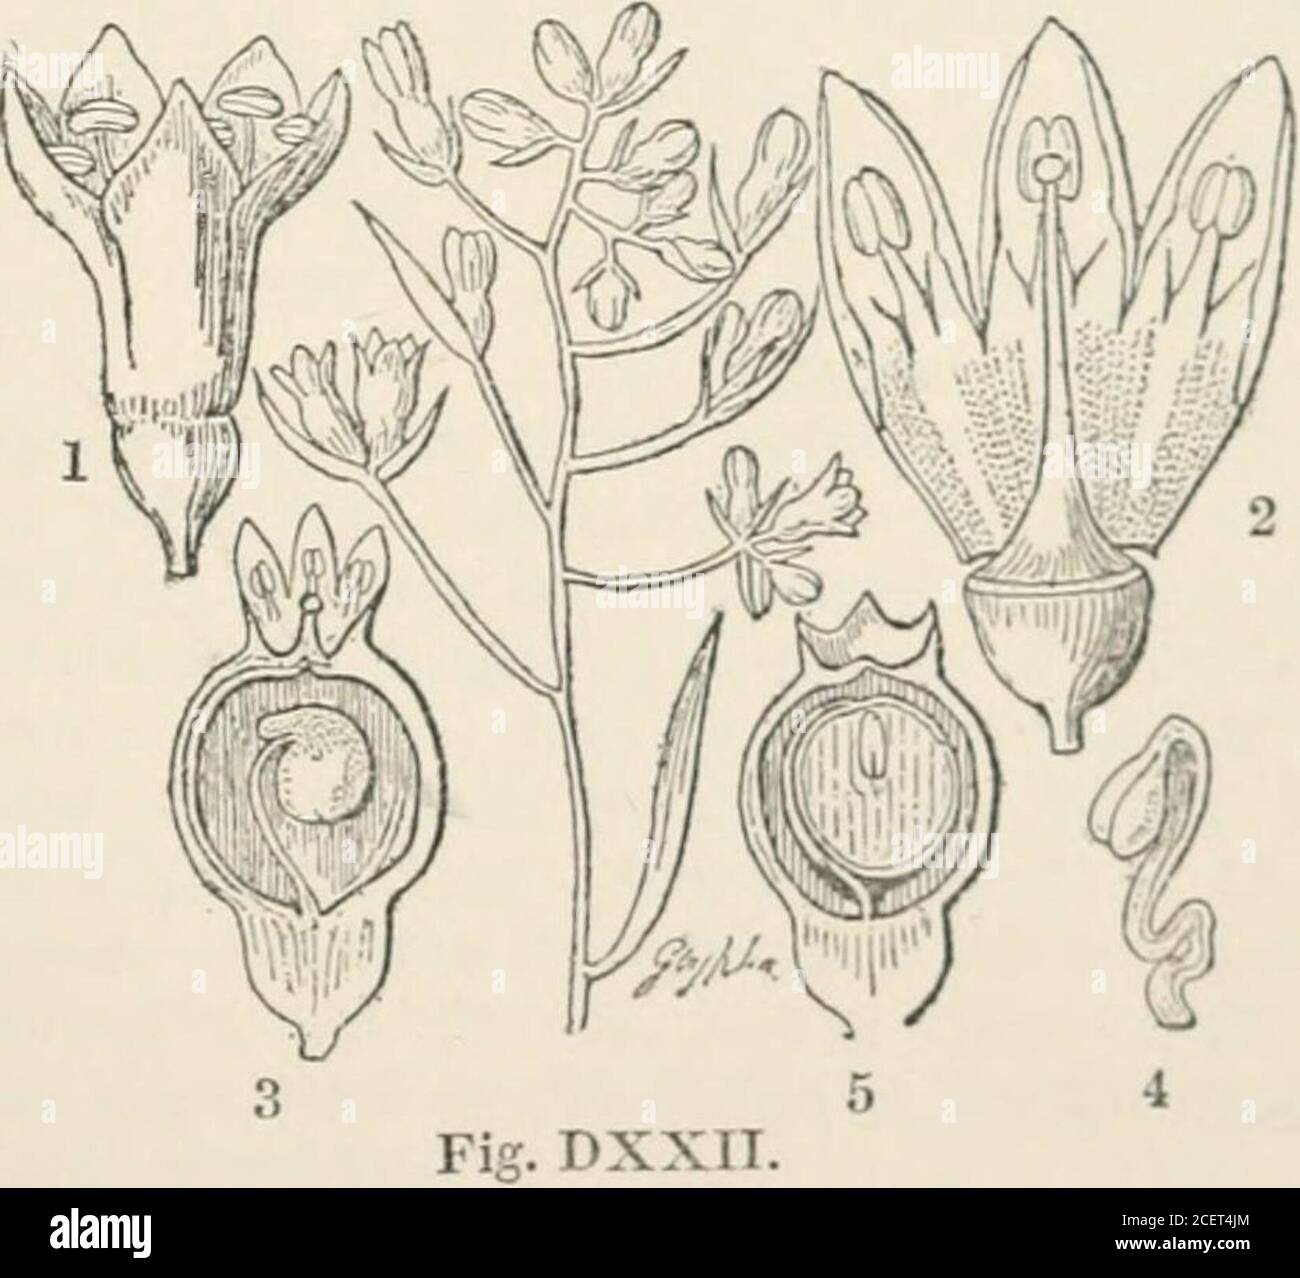 . The vegetable kingdom : or, The structure, classification, and uses of plants, illustrated upon the natural system. 788 SANTALACE^. [Epigtnous Exogens. Chilenos, is purgative. The fruit of the Quandang Nut (Fusanus acuminatus) is as sweetand useful to the New Hollanders as Almonds are to us ; that of Cervantesia tomentosahas a similar reputation in Peru. Oil is obtamed in Carolina from the kernels ofP}Tularia pubera. Leptomeria Billardieri, a common Tasmannian shrub resemblingthe European Broom in its green and almost leafless habit, is acid in almost every part,especially in the fruit, but Stock Photo